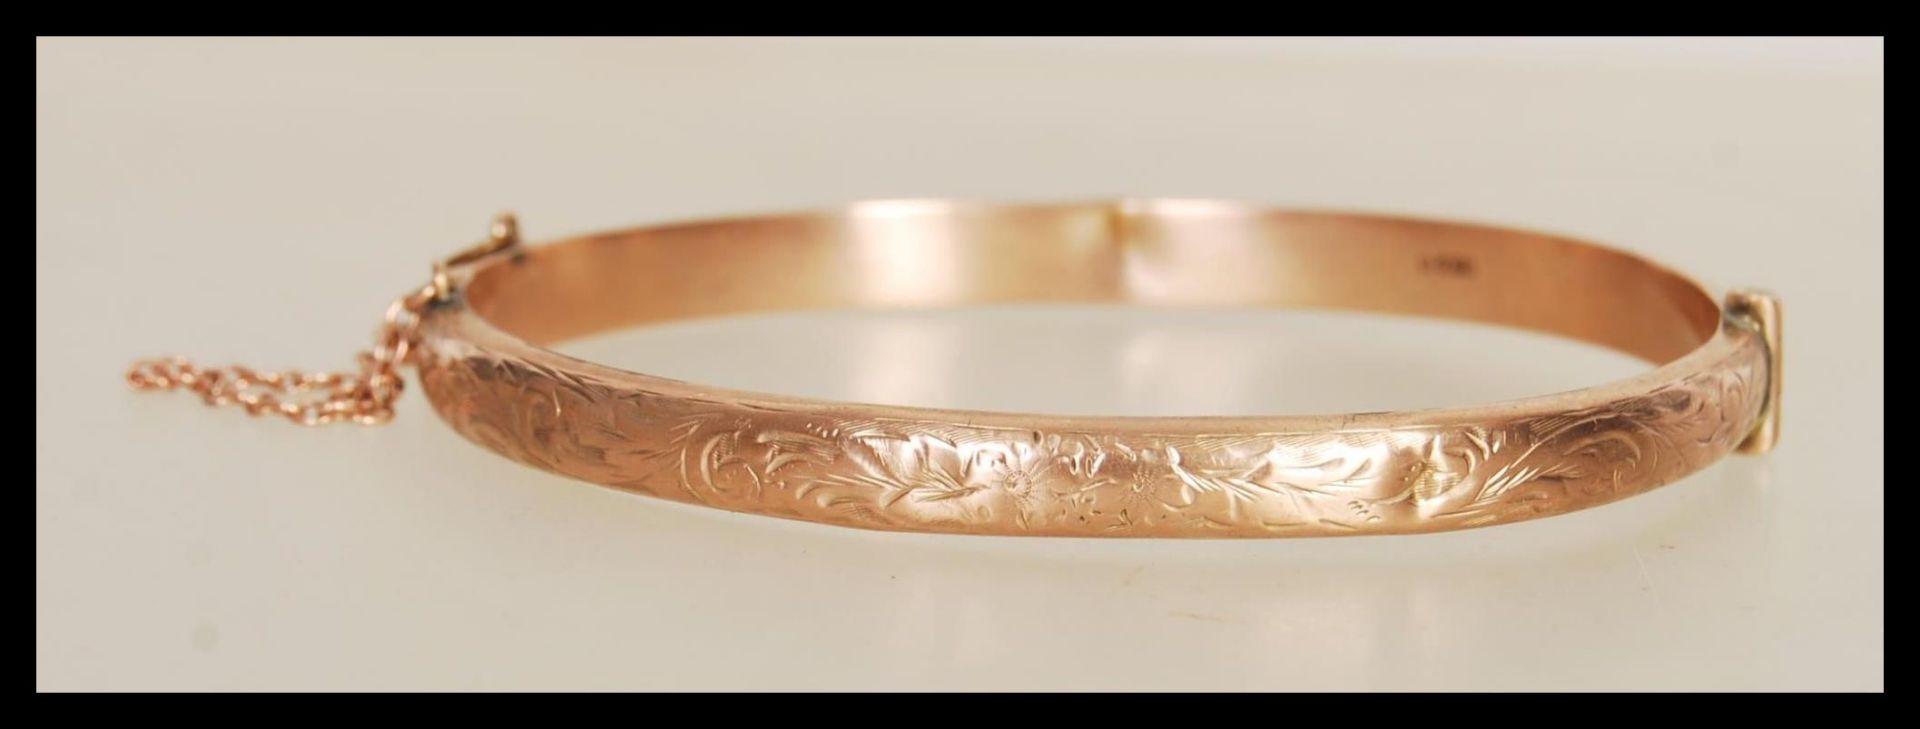 A hallmarked 9ct gold bangle bracelet with engraved floral decoration to front, having hinged